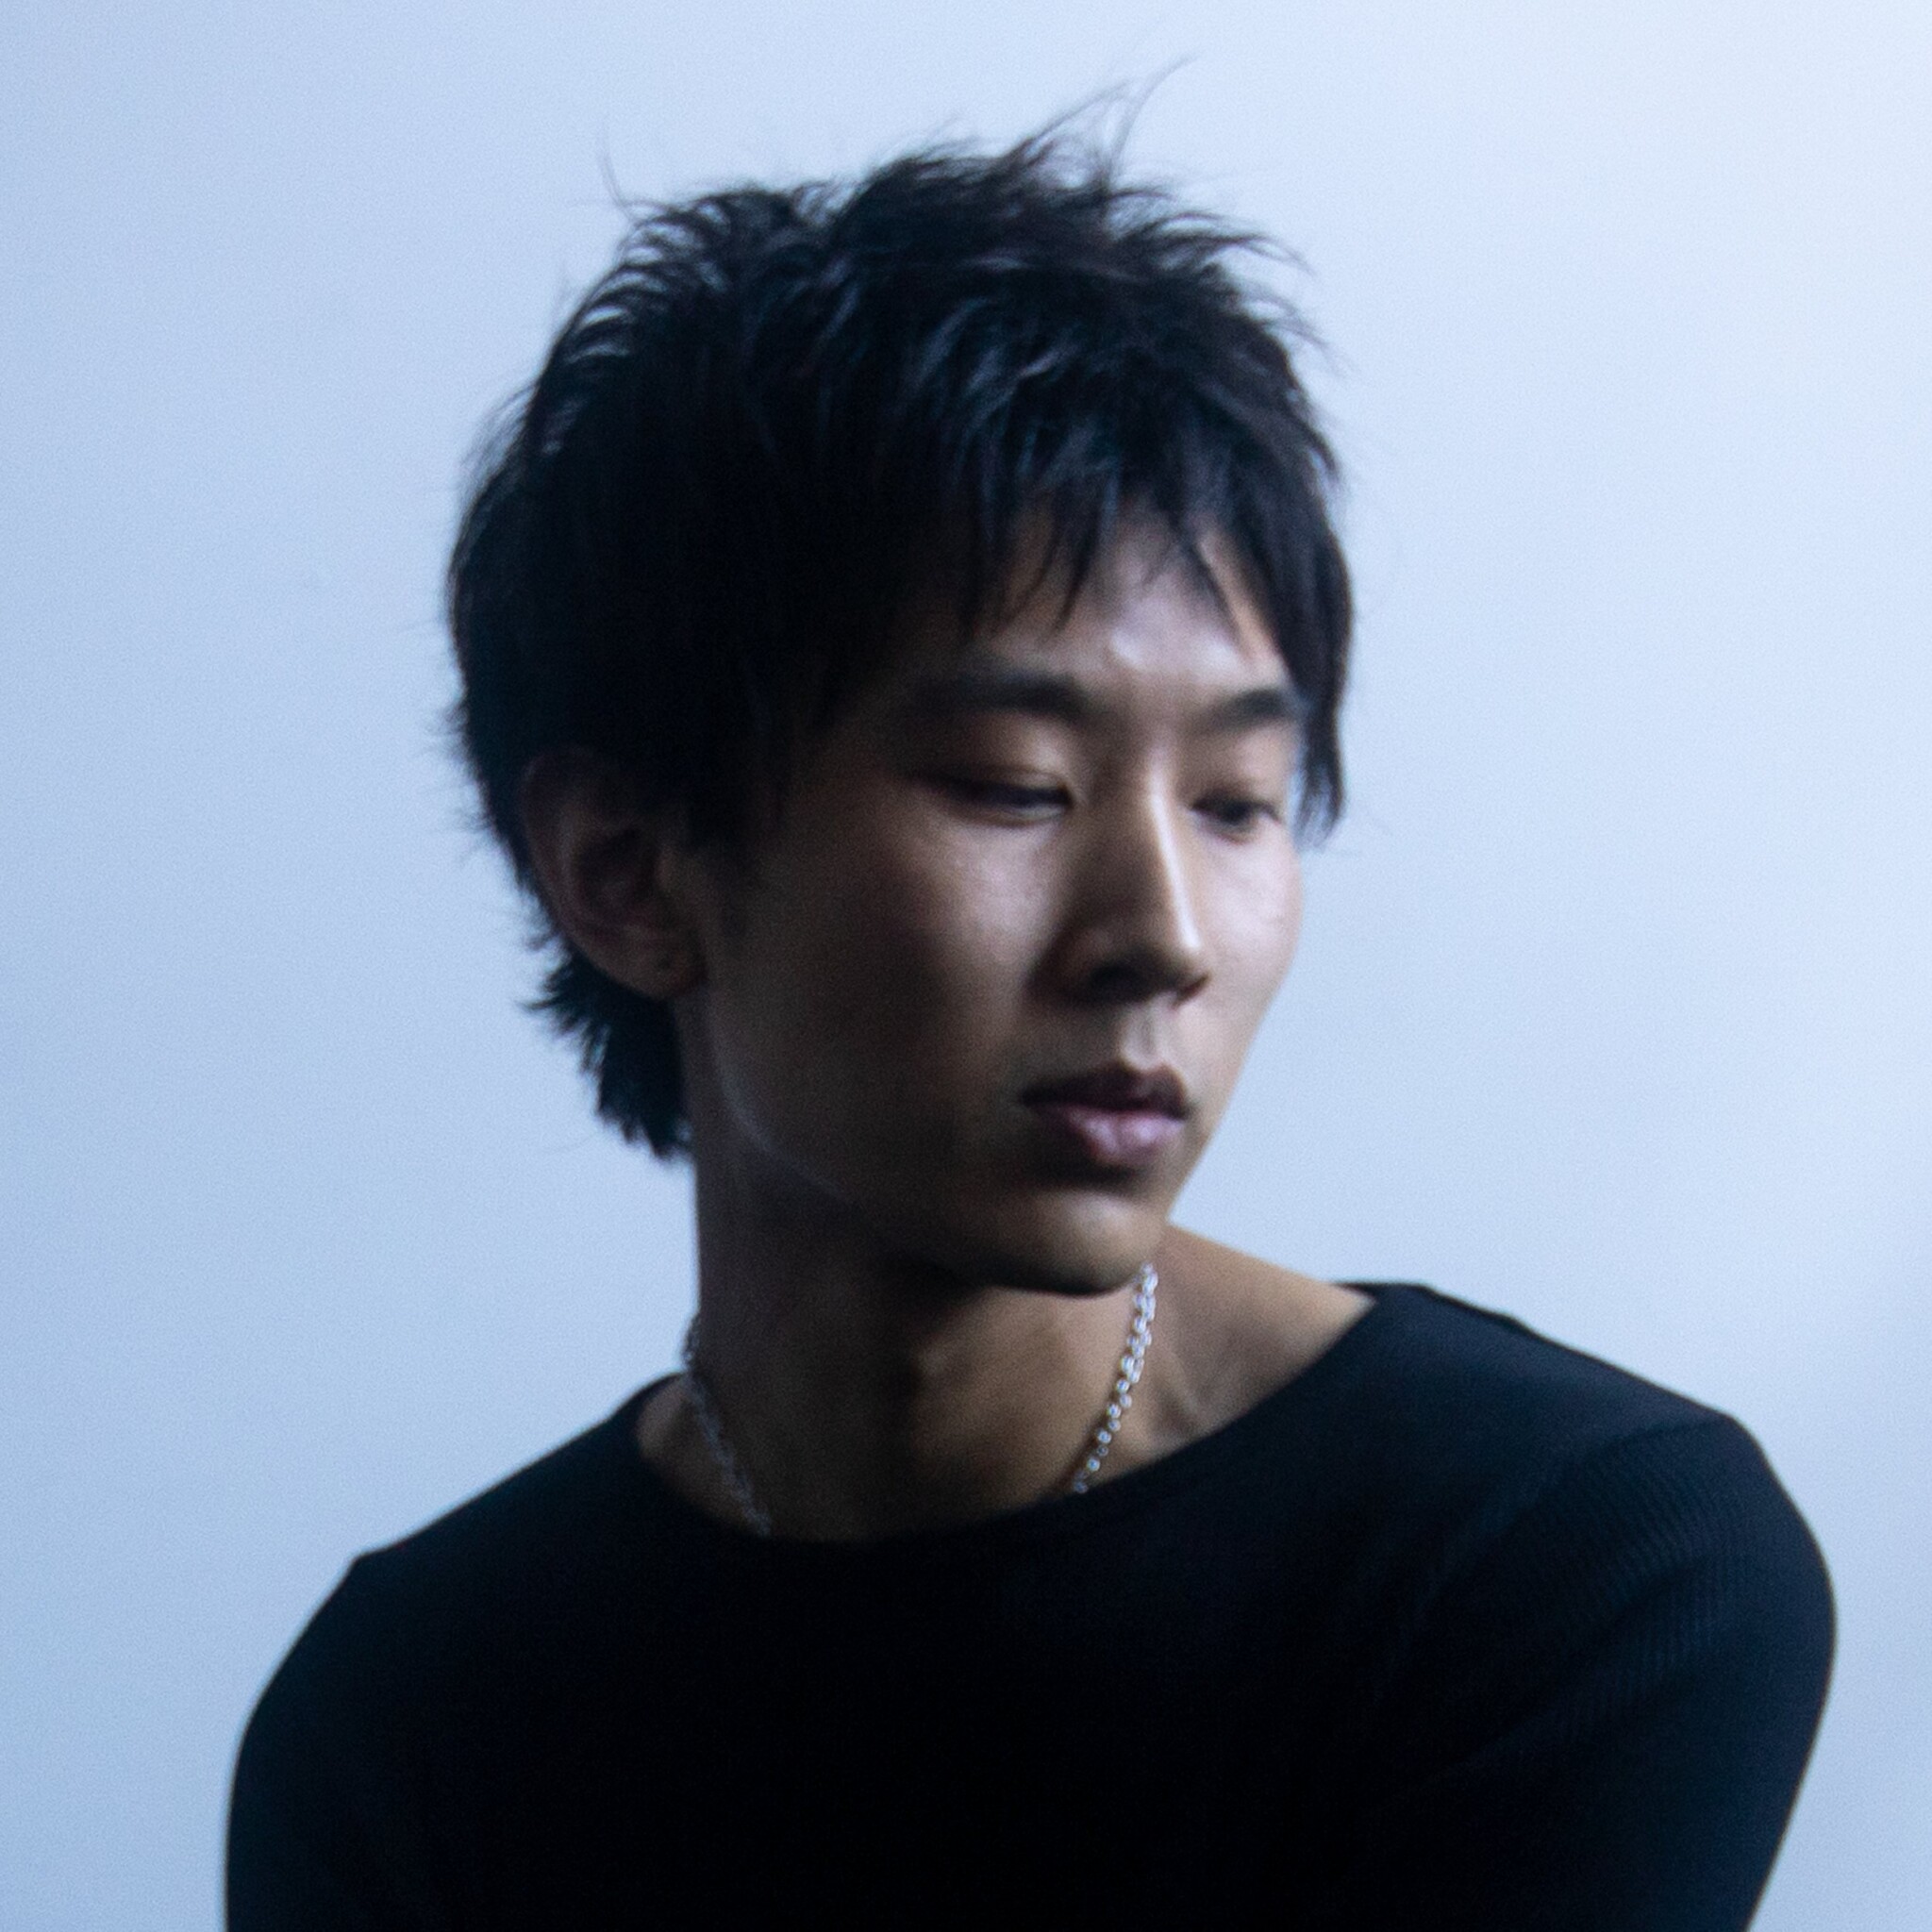 A young Asian man with black hair, in a black top, looks down and to the right, against a light blue background.